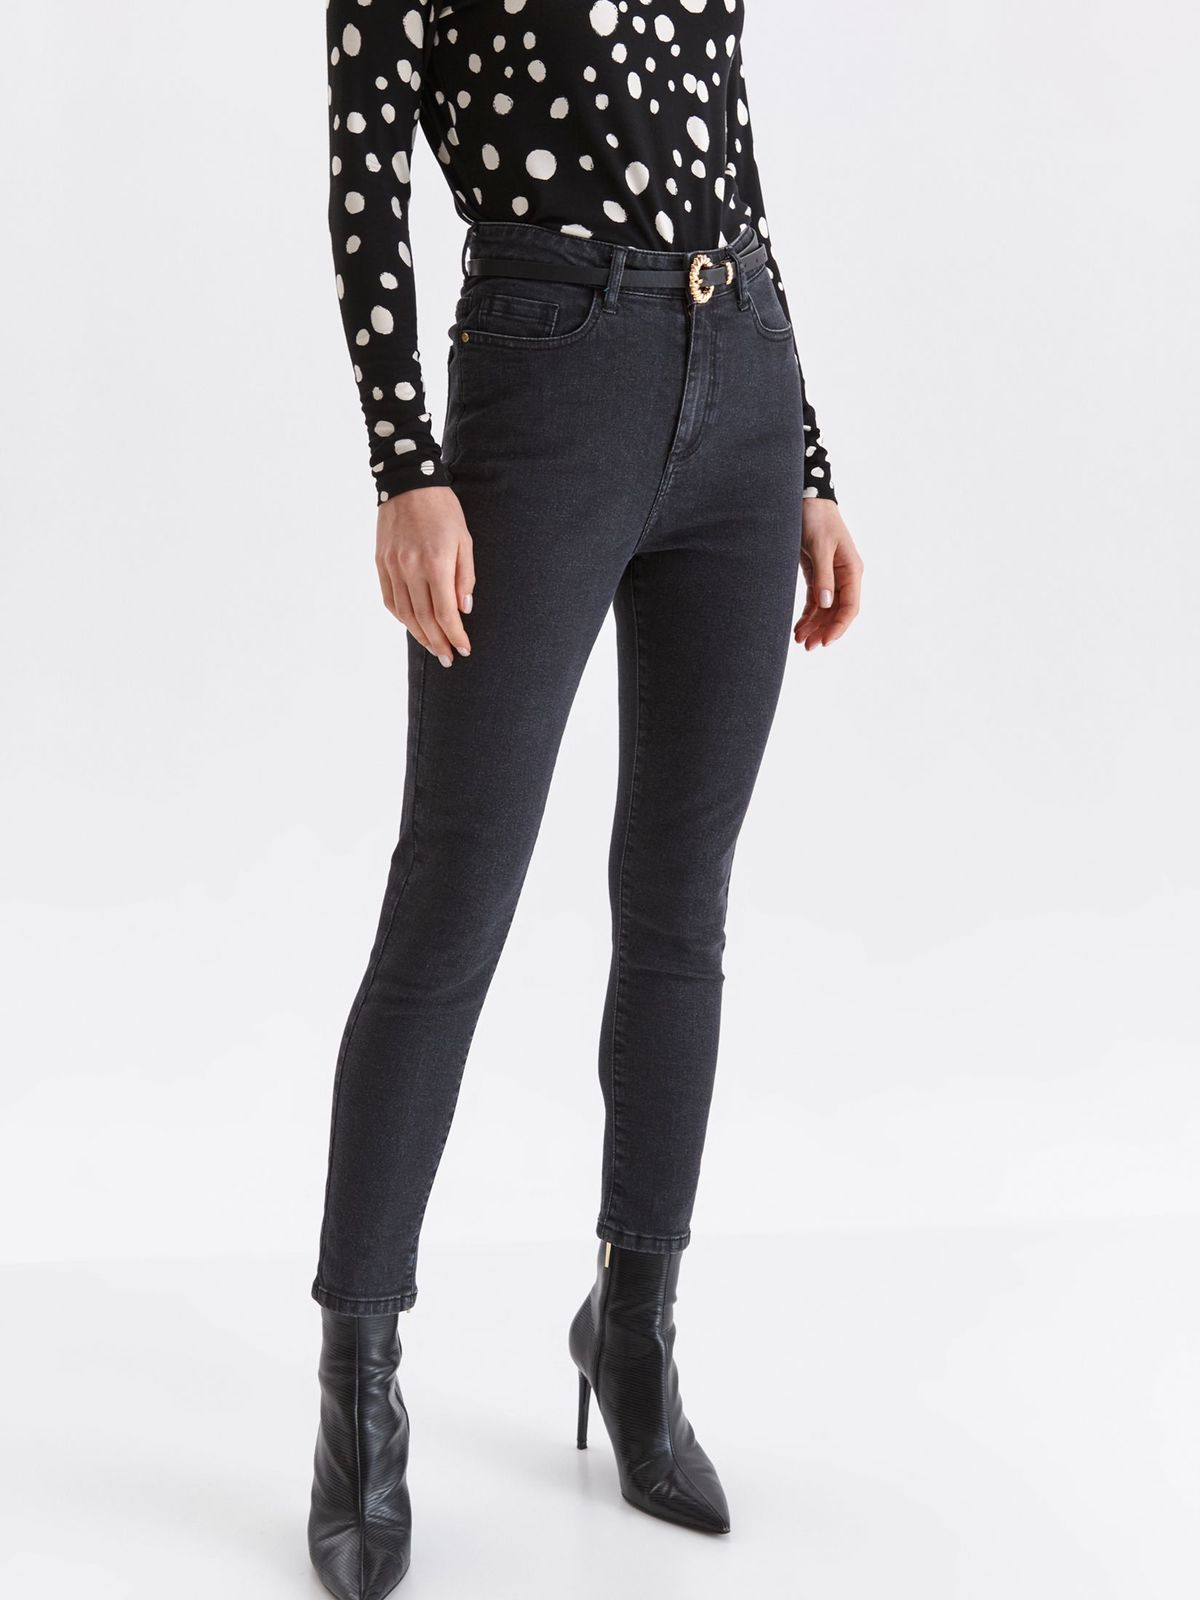 Black trousers denim long conical high waisted 2 - StarShinerS.com